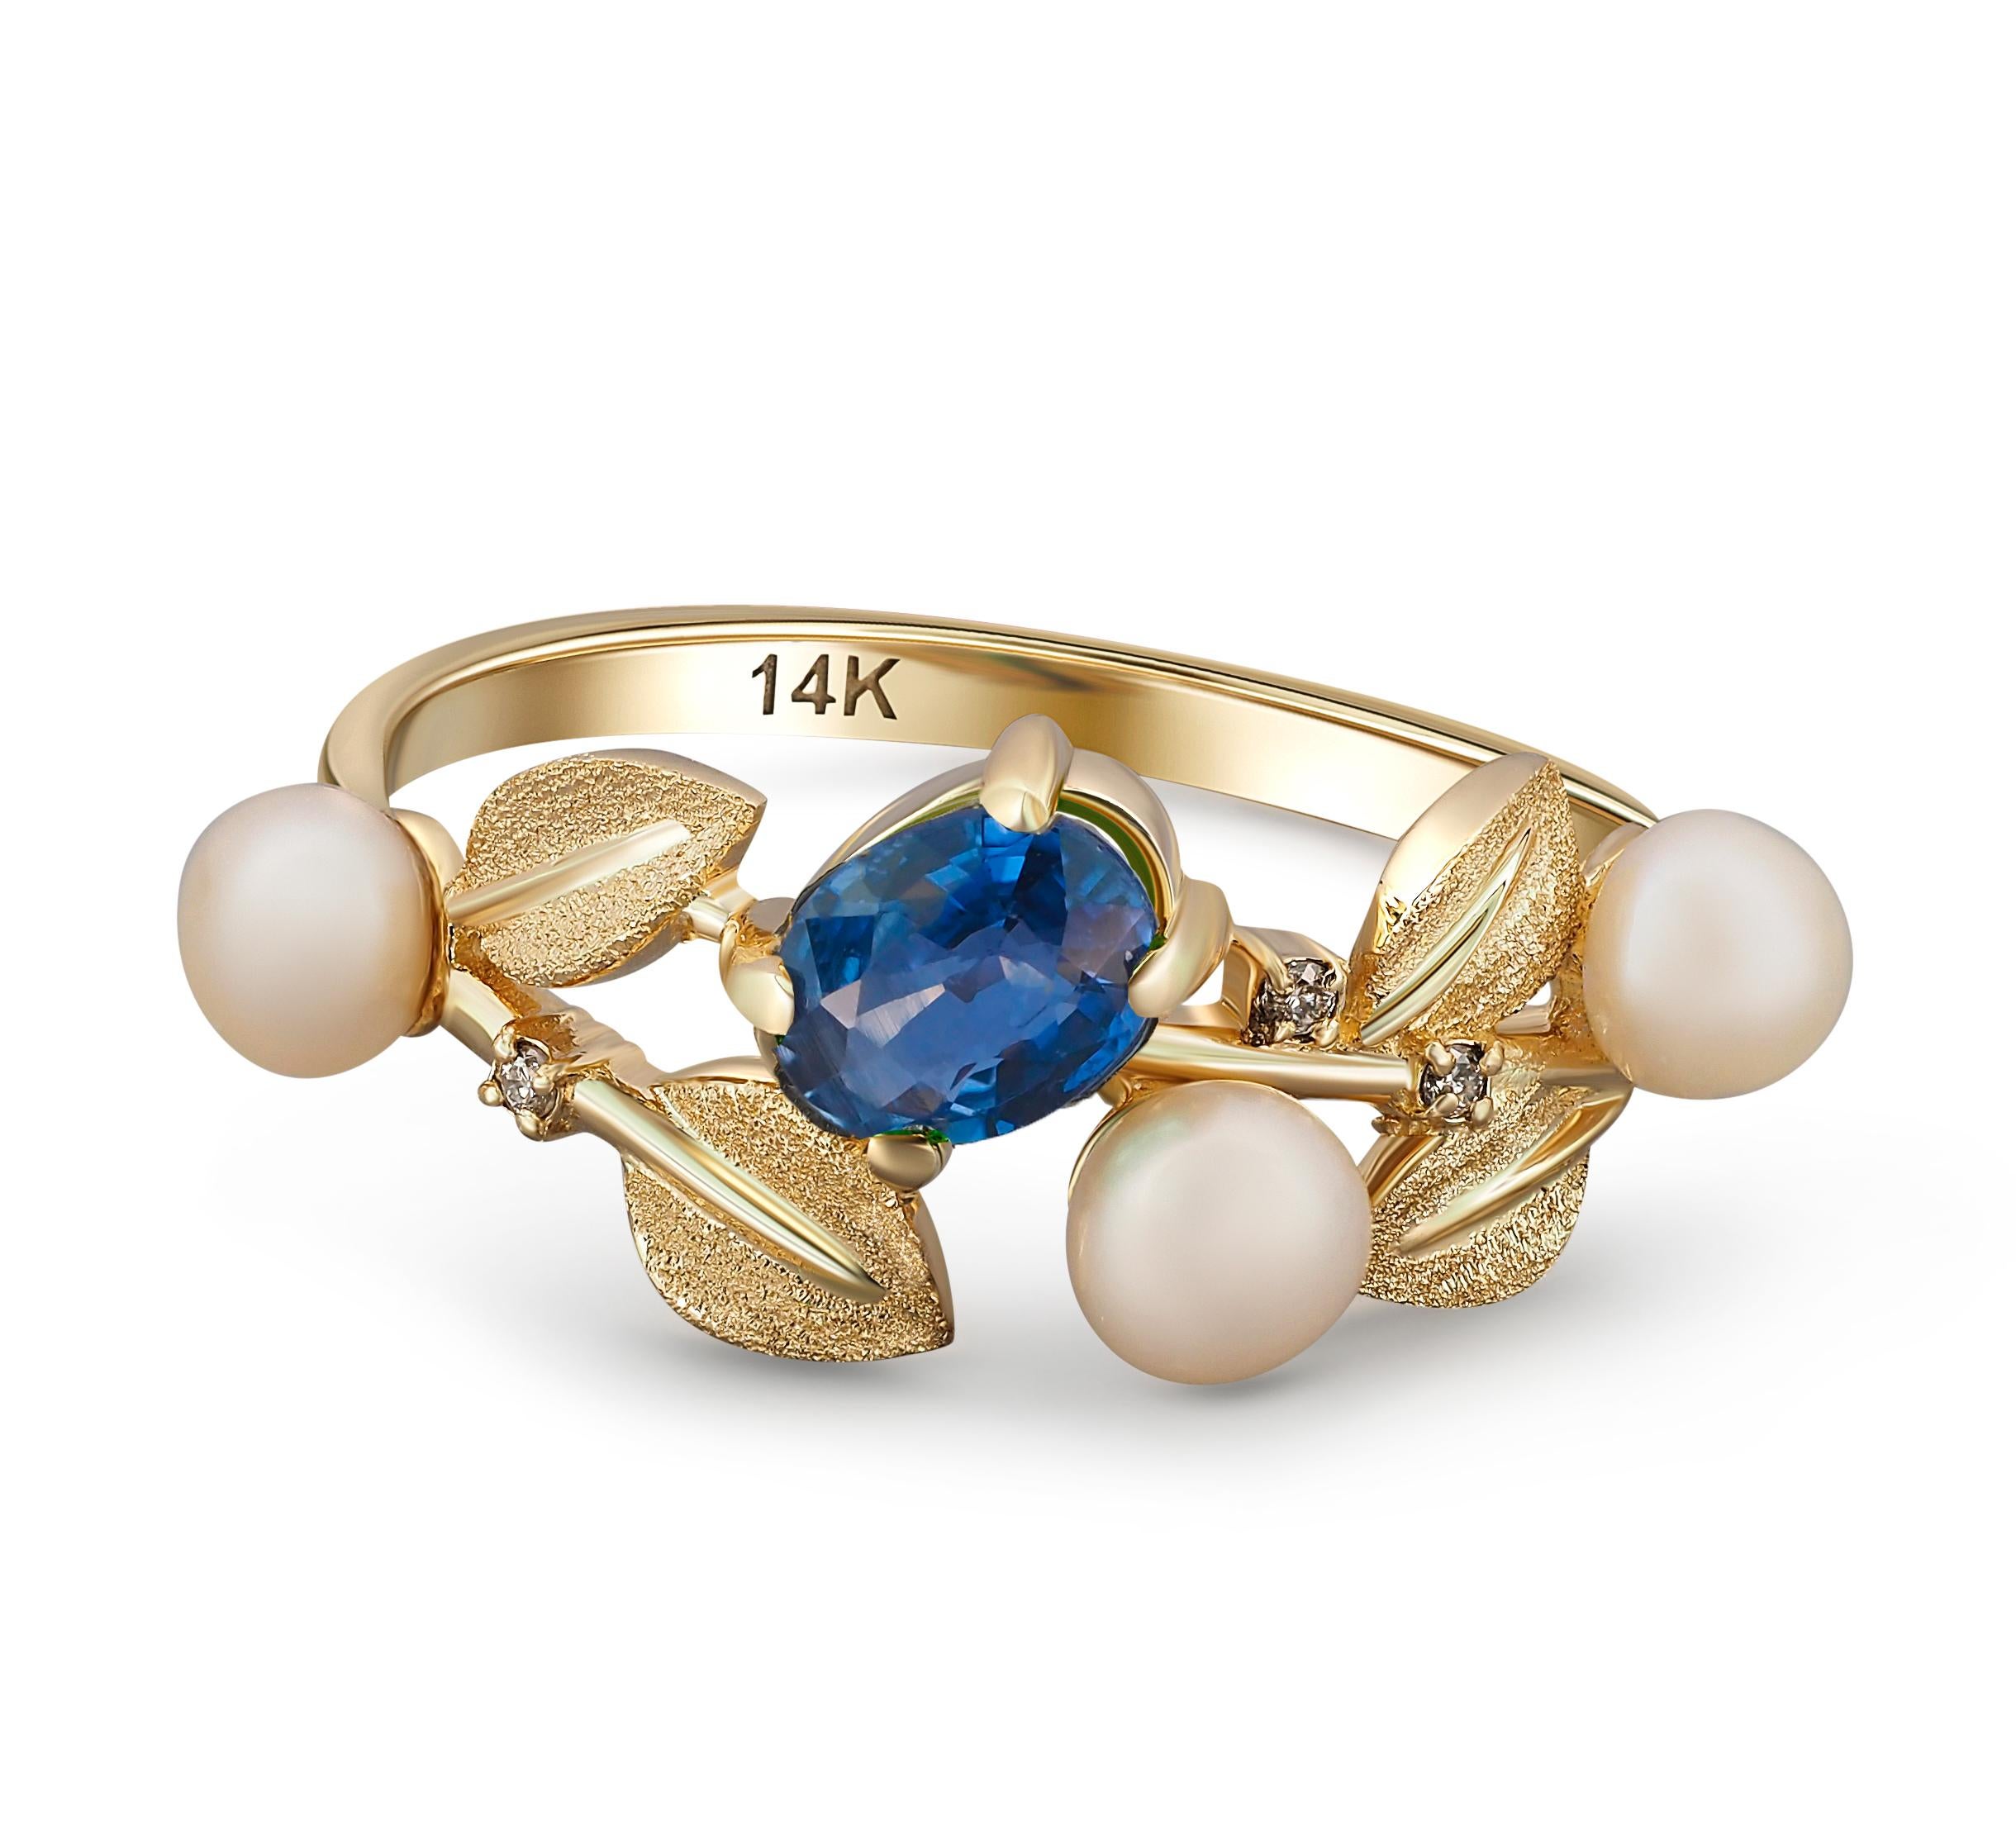 Blue sapphire, pearl, diamonds 14k gold ring. 
Gold leaves ring. September birthstone. Gold Branch ring. Oval sapphire gold ring.

Metal: 14k gold
Weight: 1.8 g. depends from size.
 
Central stone: sapphire
Cut: Oval
Weight: aprx 0.8 ct.
Color: